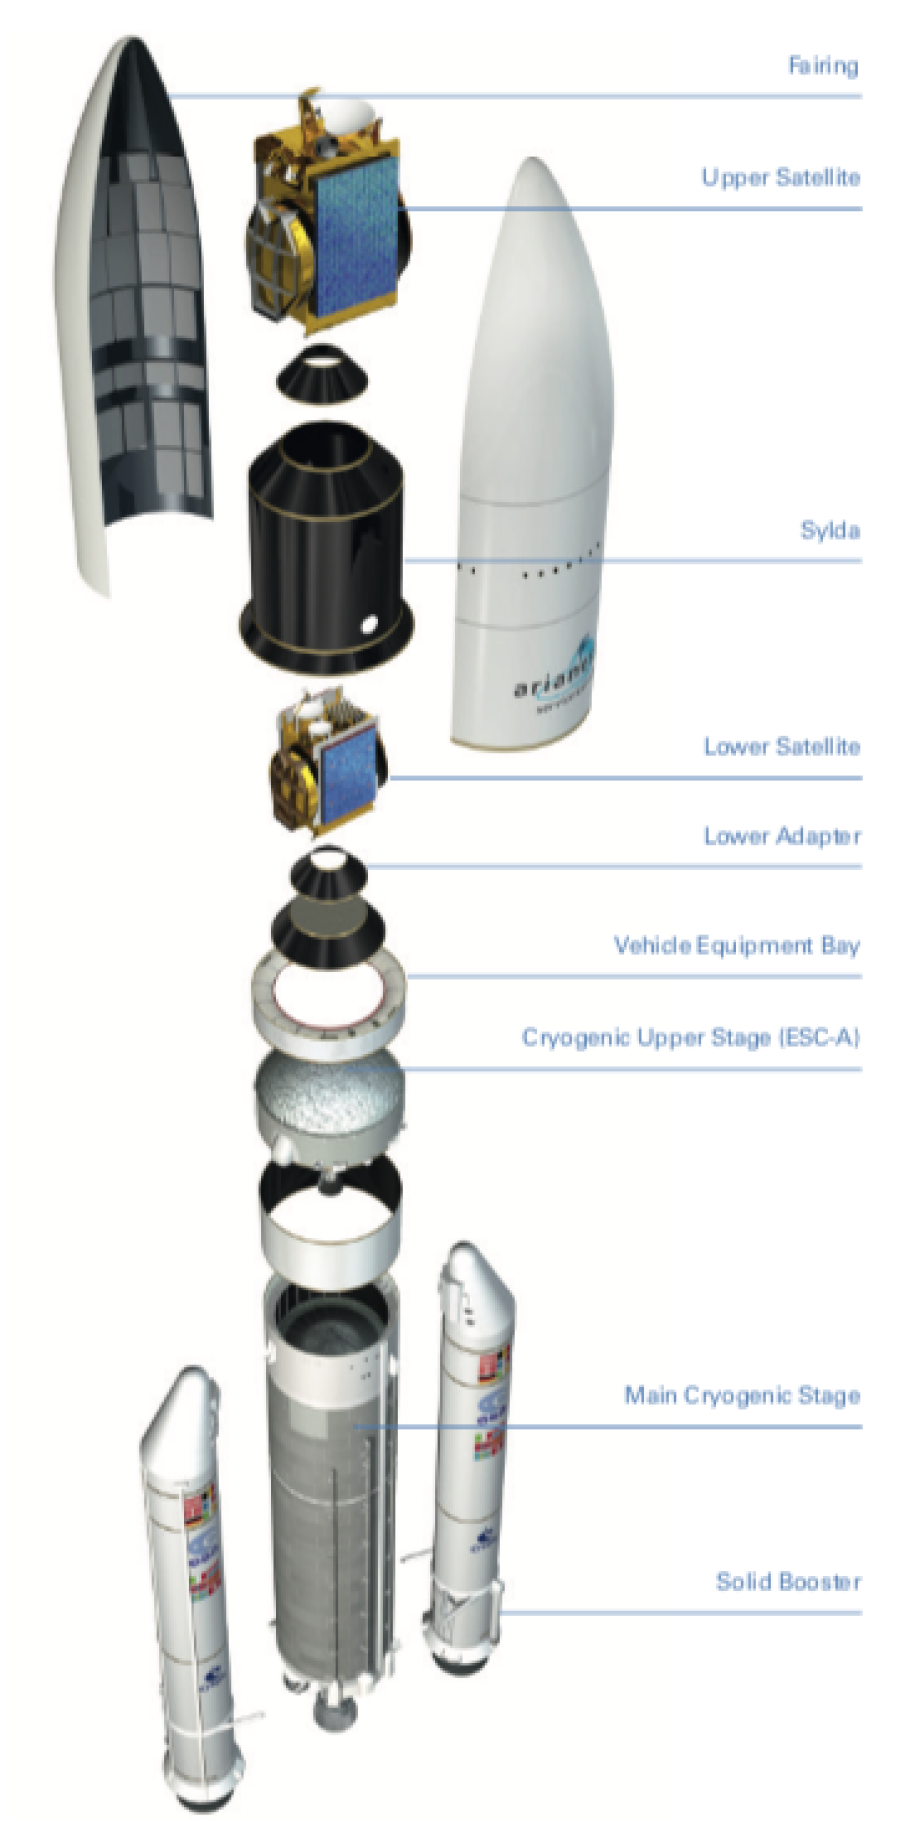 Cutaway diagram indicating parts of the Ariane 5 rockets. Parts include (from top to bottom): Fairing, Upper Satellite, Sylda, Lower Satellite, Lower Adapter, Vehicle Equipment Bay, Cryogenic Upper Stage (ESC-A), Main Cryogenic Stage, and Solid Booster